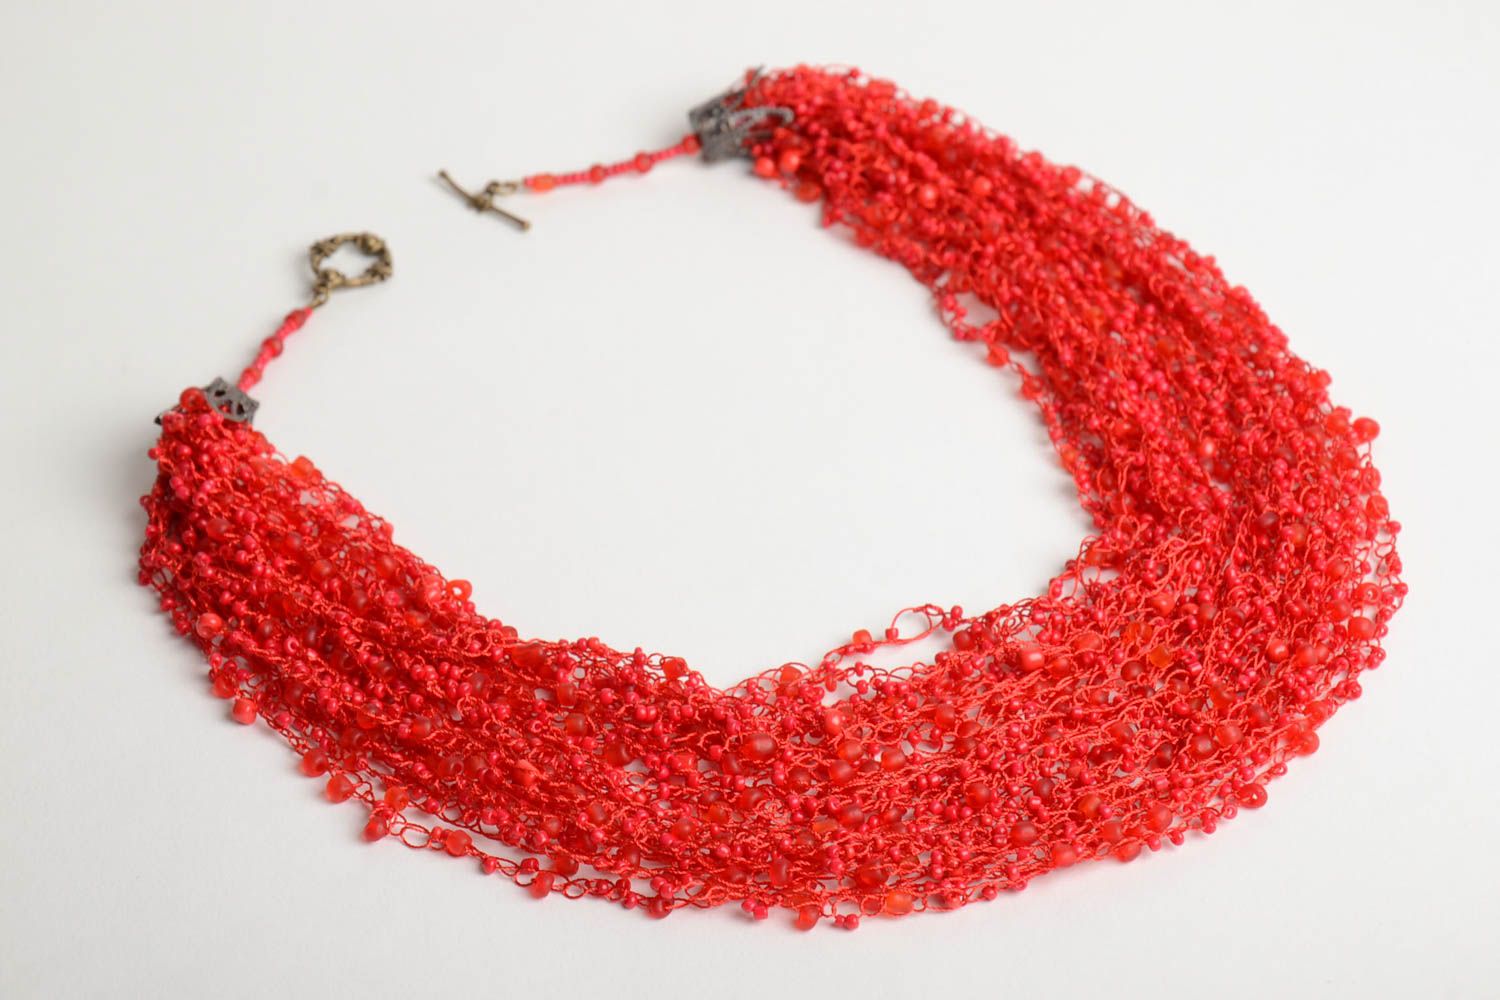 Handmade designer multi row volume airy bright red necklace crocheted of beads photo 3